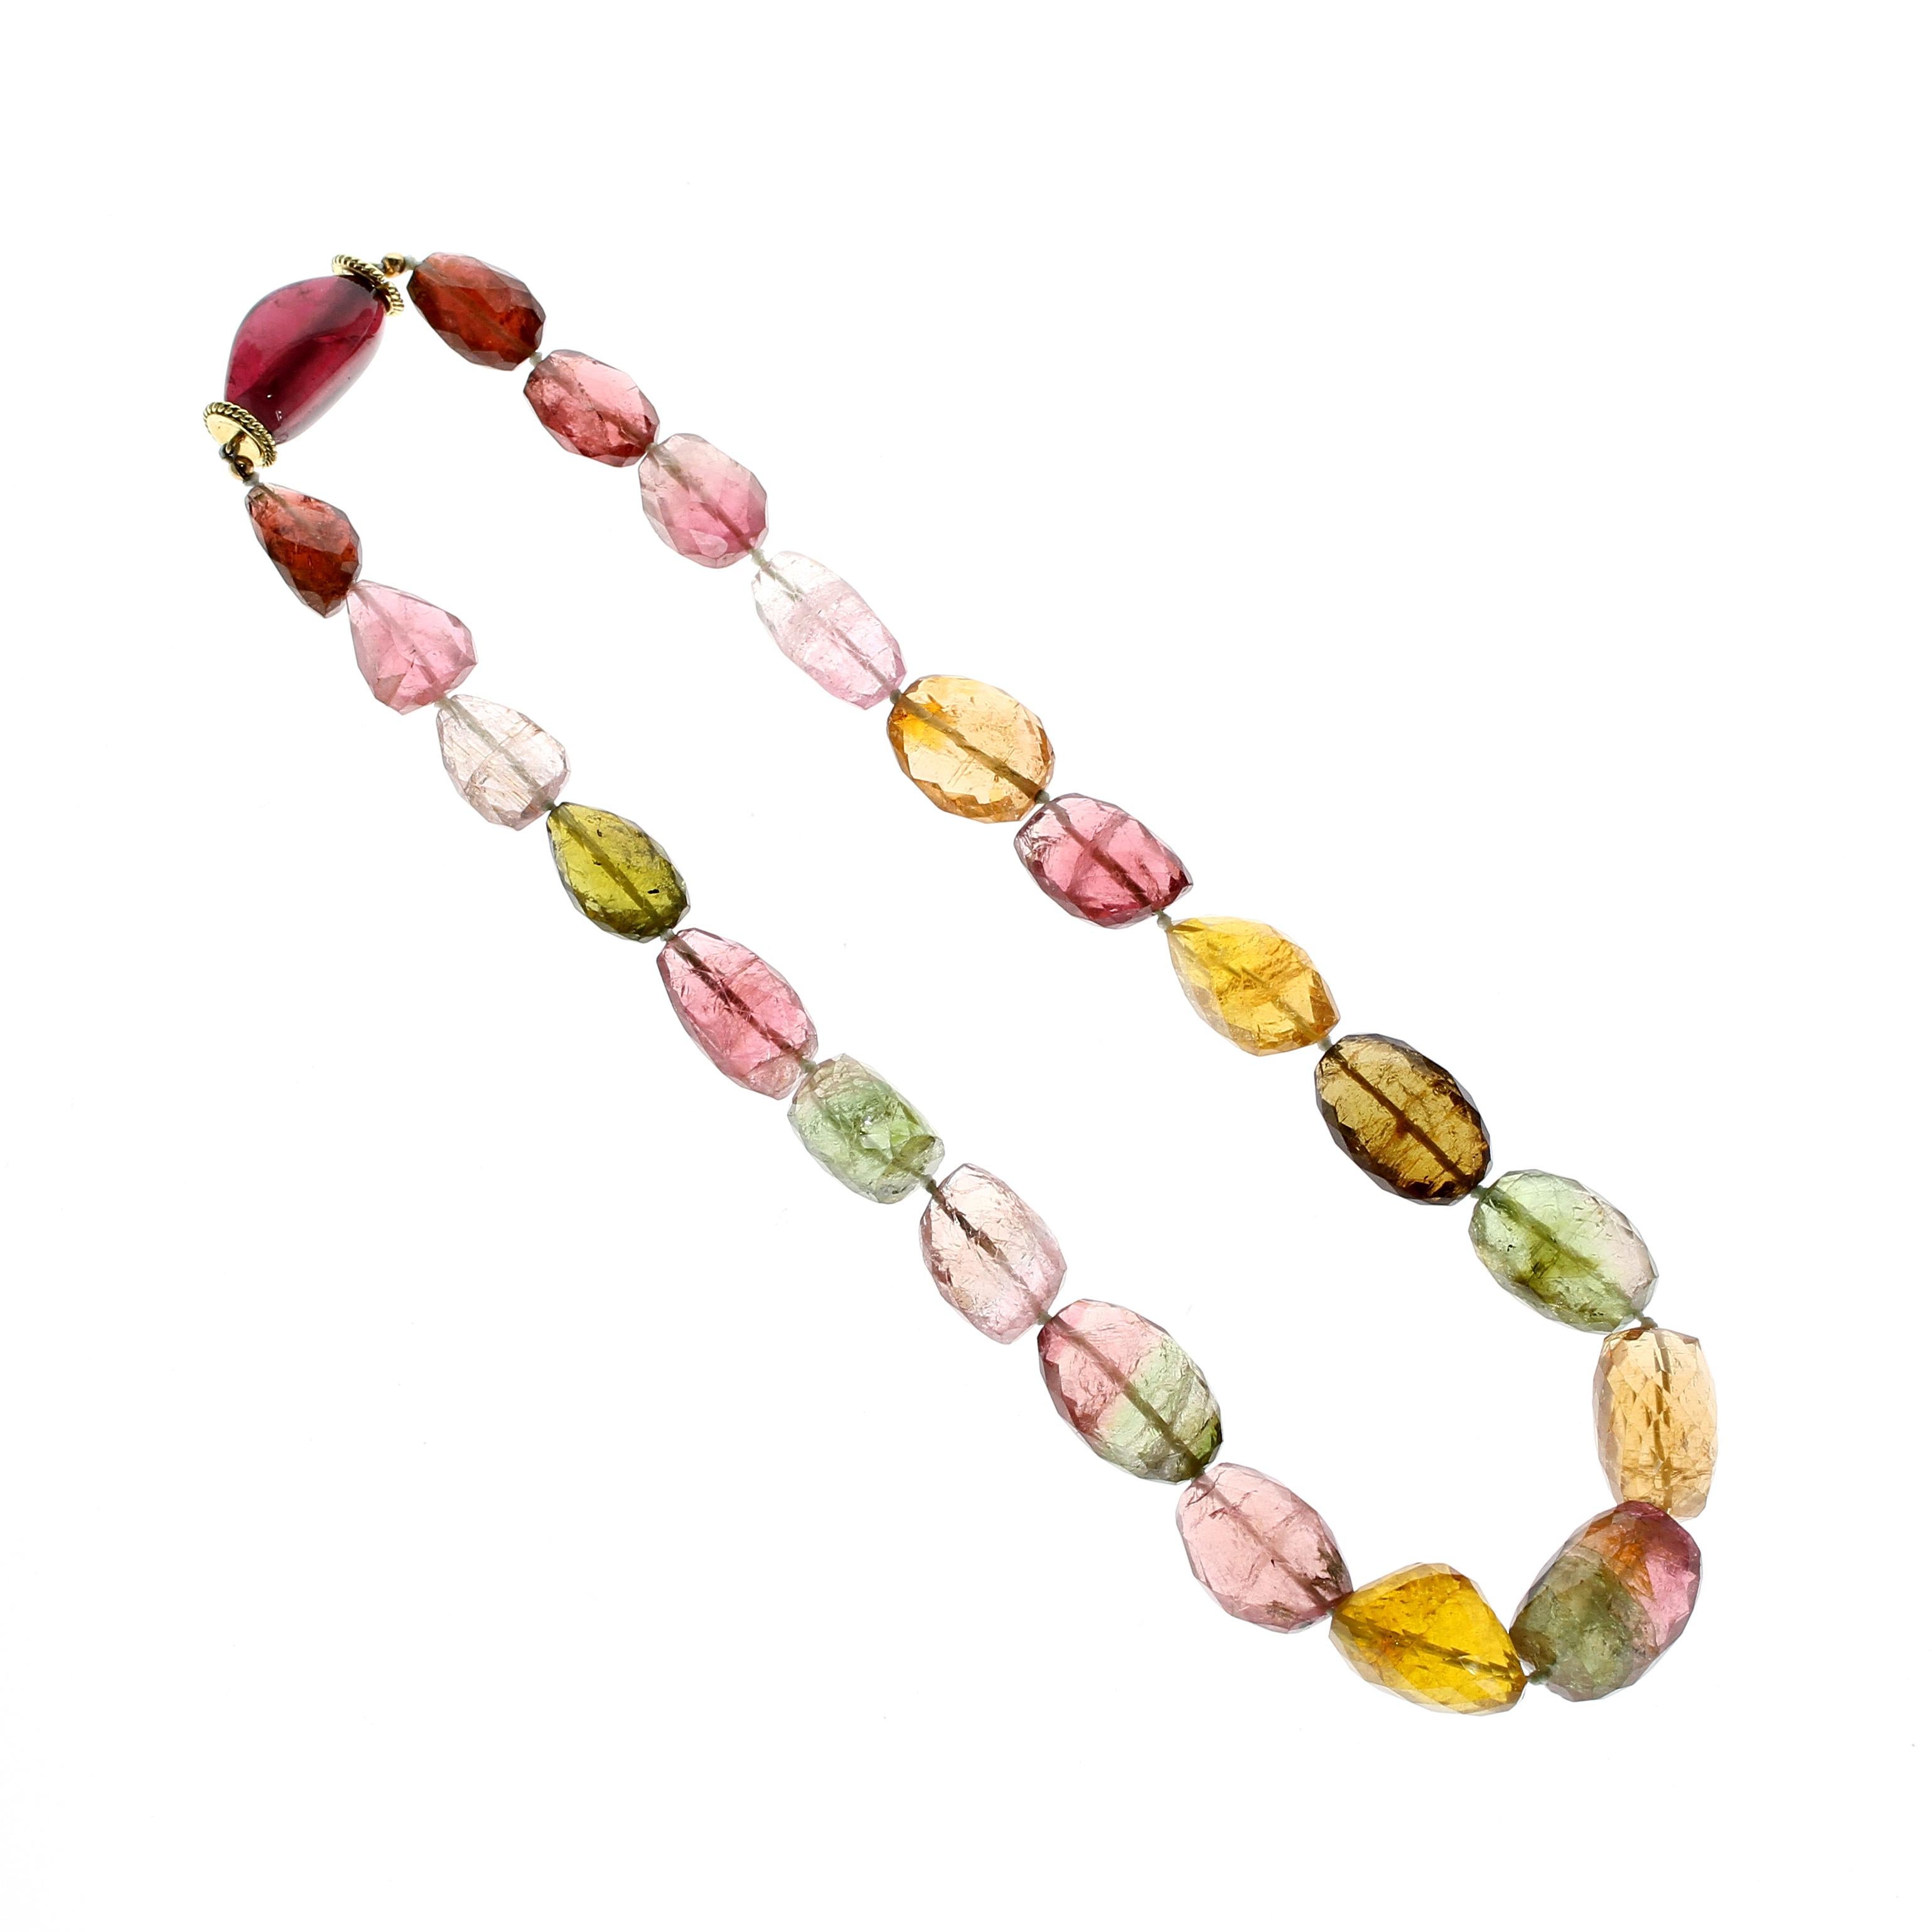 A unique and colorful gemstone bead necklace with various natural colors and organic shapes of tourmaline set in simple and easy-to-use 18kt yellow gold clasp. The one-strand necklace consists of twenty-two beads of tourmaline handsomely measuring